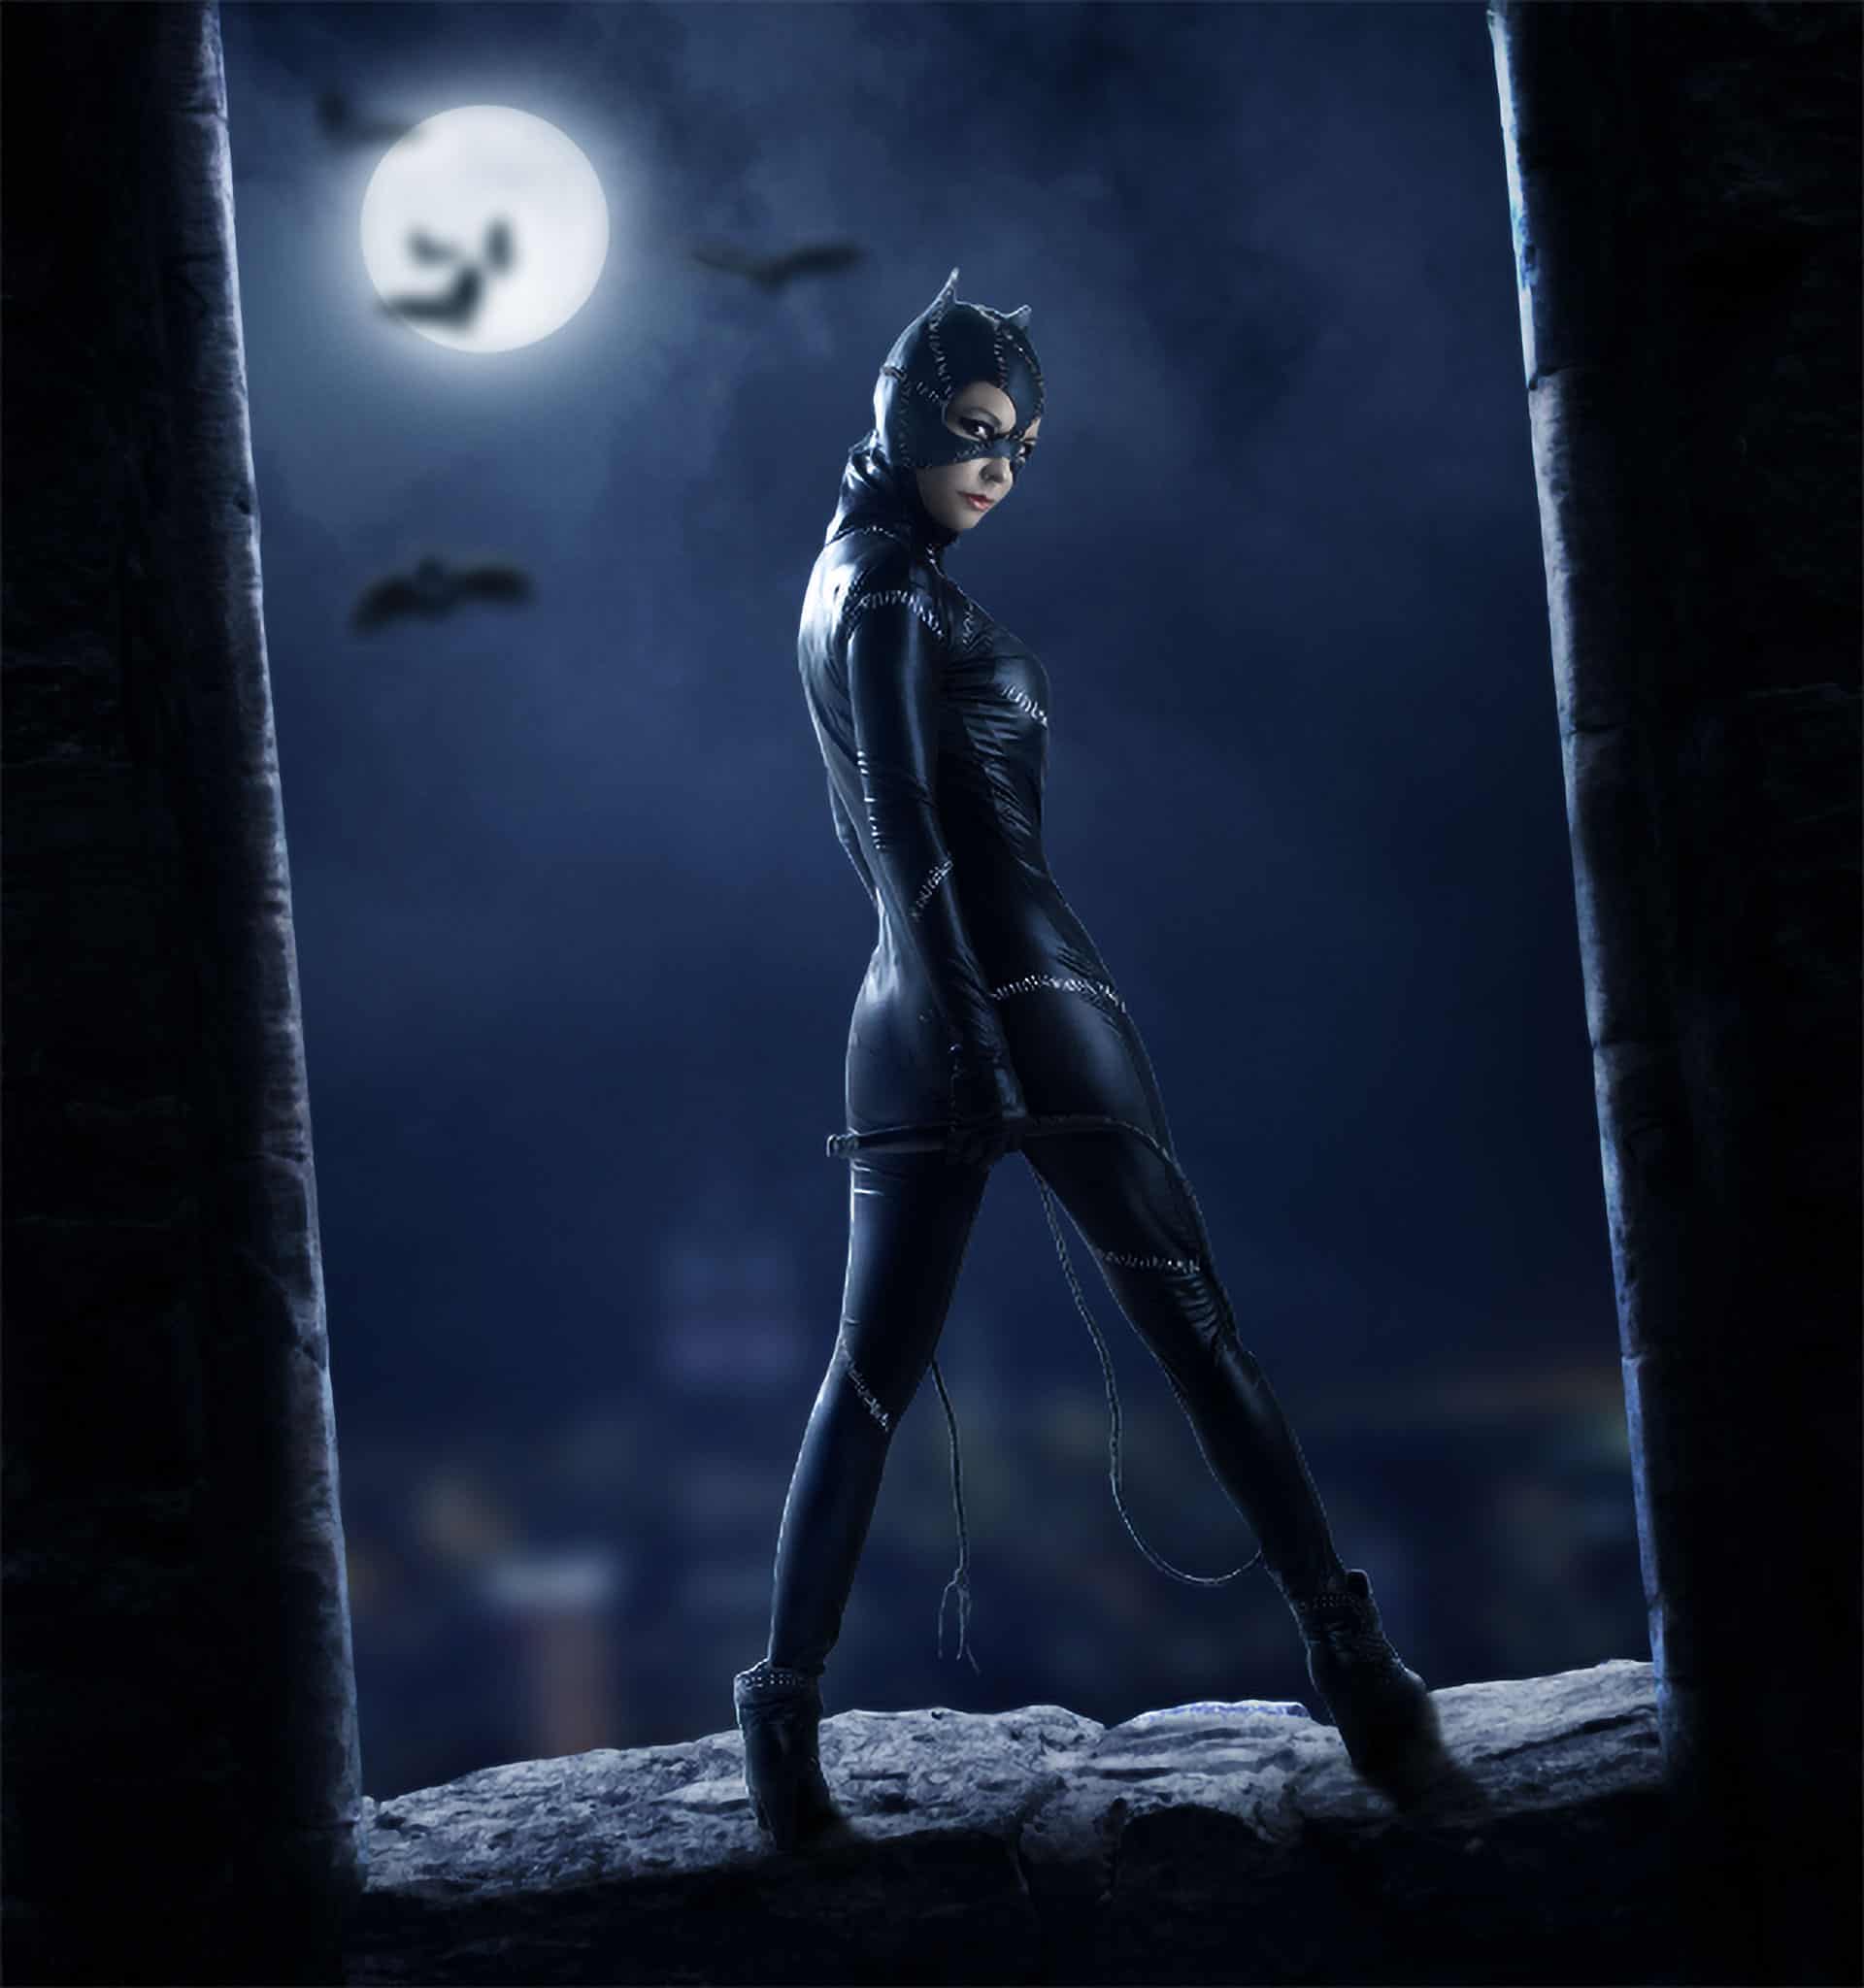 How to Create a Catwoman Poster in Photoshop